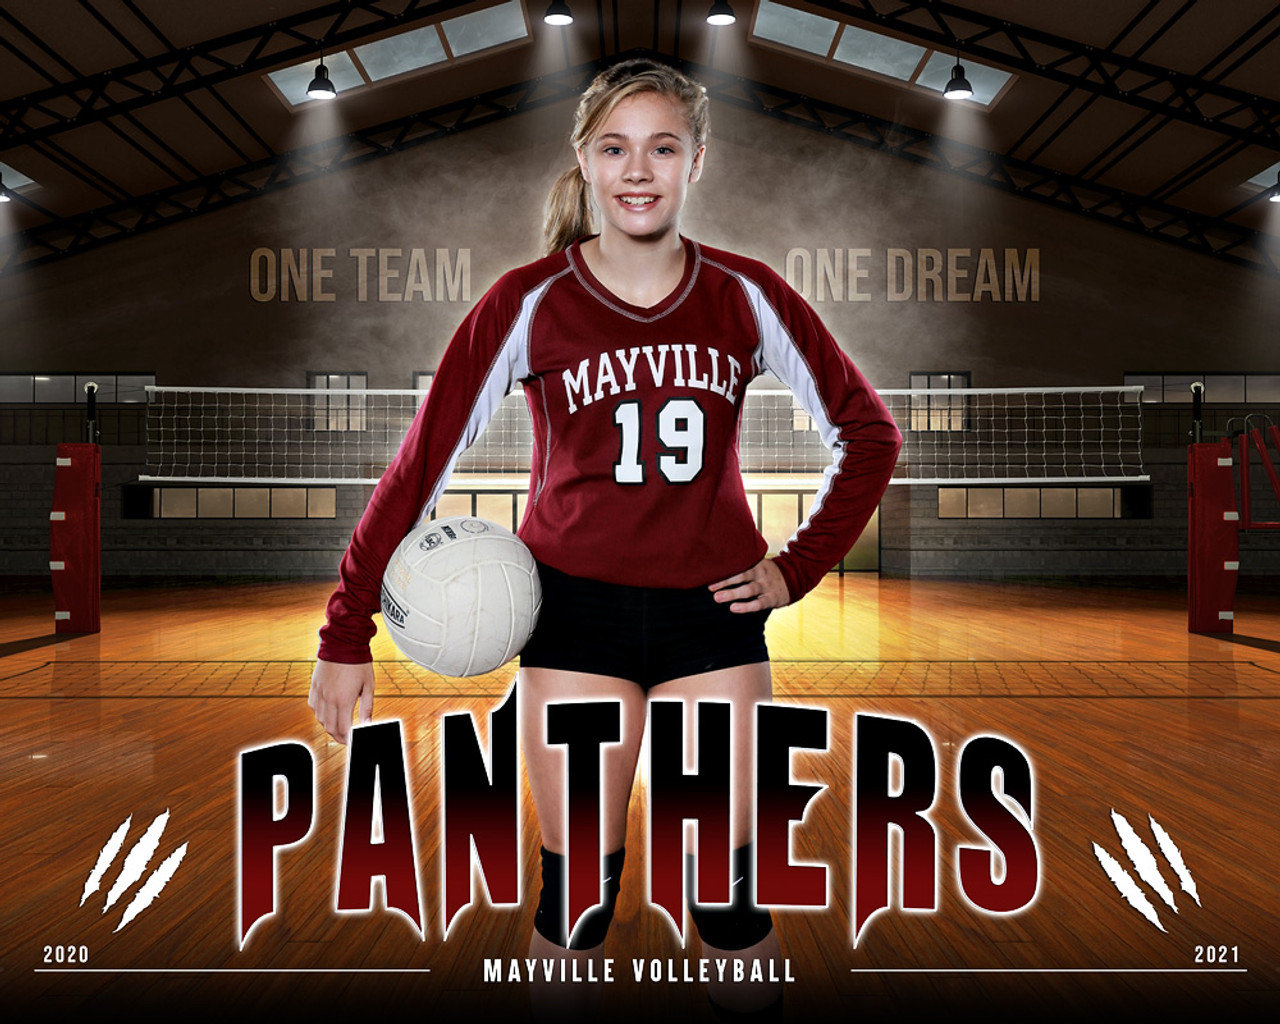 SPORTS POSTER PHOTO TEMPLATE - MAYVILLE - LAYERED PHOTOSHOP SPORTS TEMPLATE